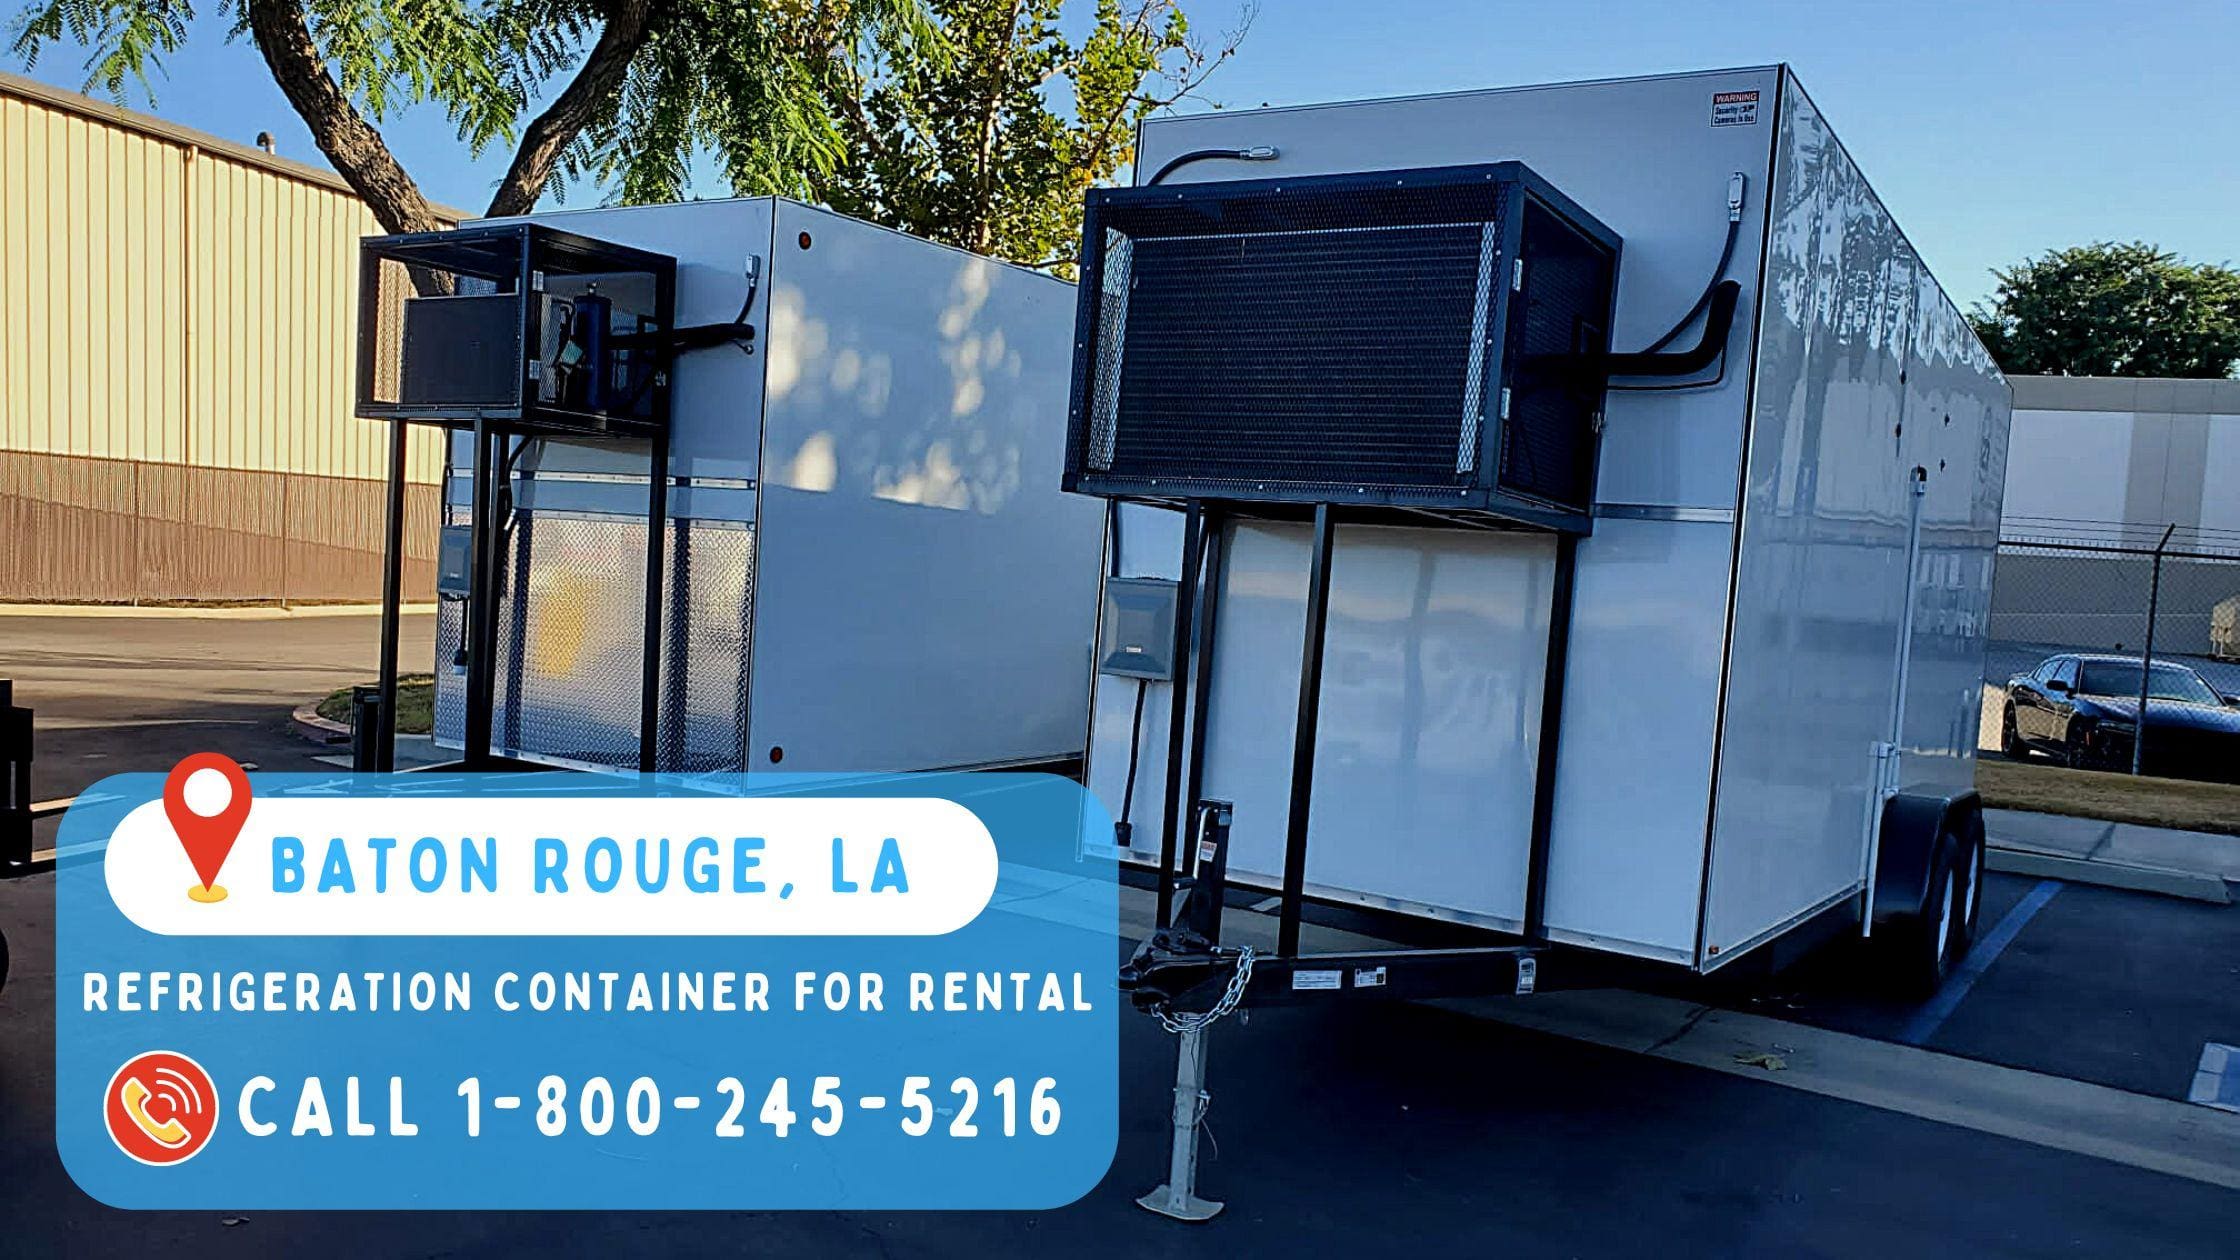 Refrigeration Container for rental Baton Rouge, LA